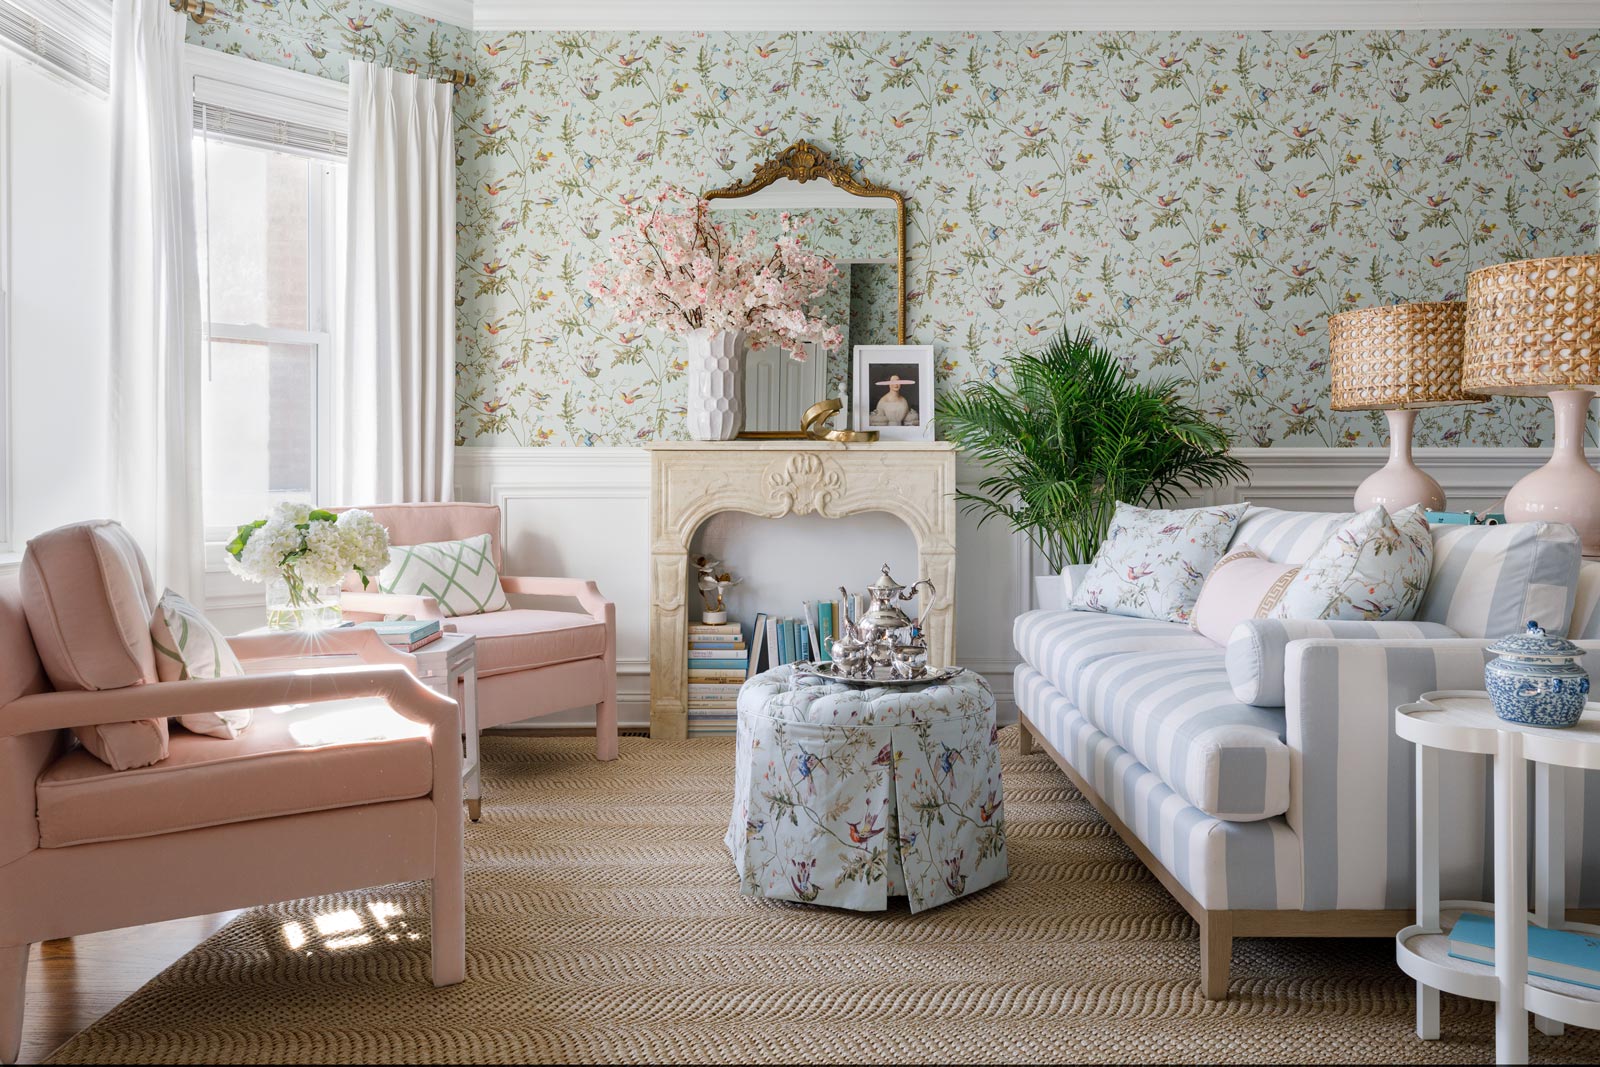 A cozy living room features pastel-colored furniture and floral-themed decor. Two pink armchairs flank a floral ottoman in front of a striped sofa. A fireplace with a mirror above is adorned with flowers, and a large plant sits beside a side table with a blue vase.